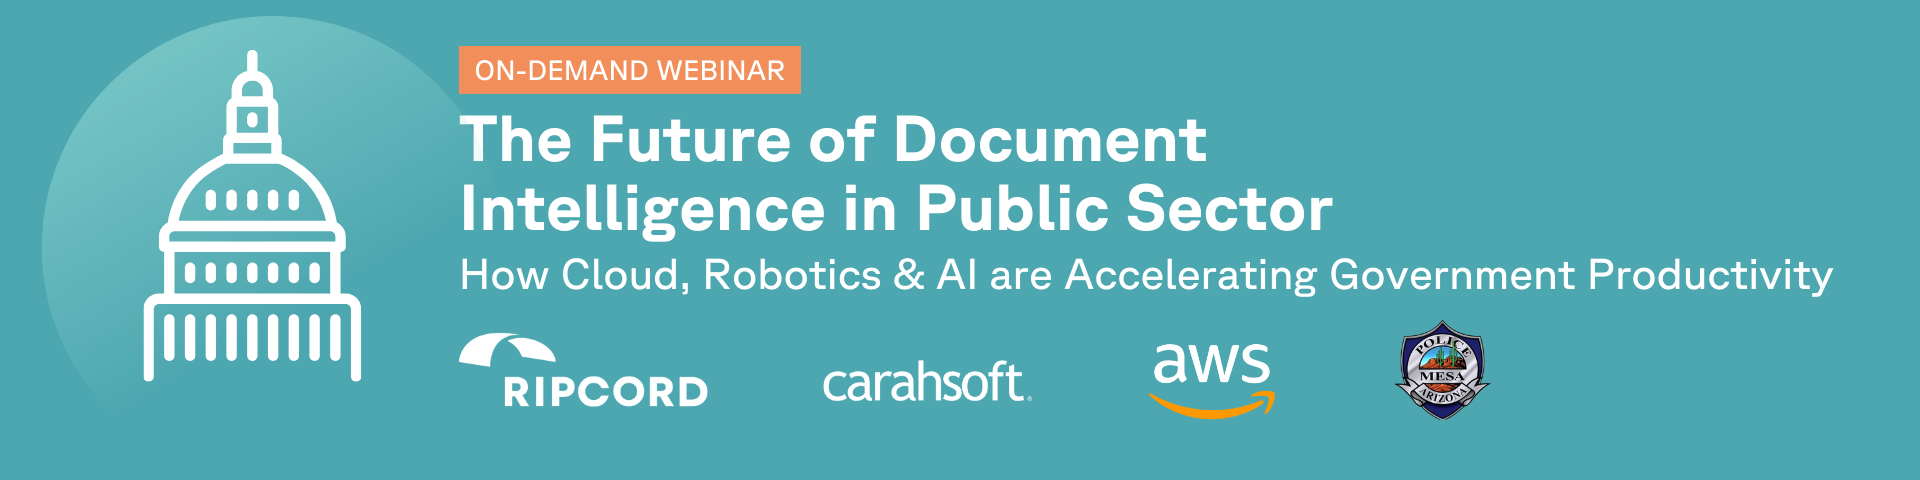 On-Demand Webinar - The Future of Document Intelligence in Public Sector